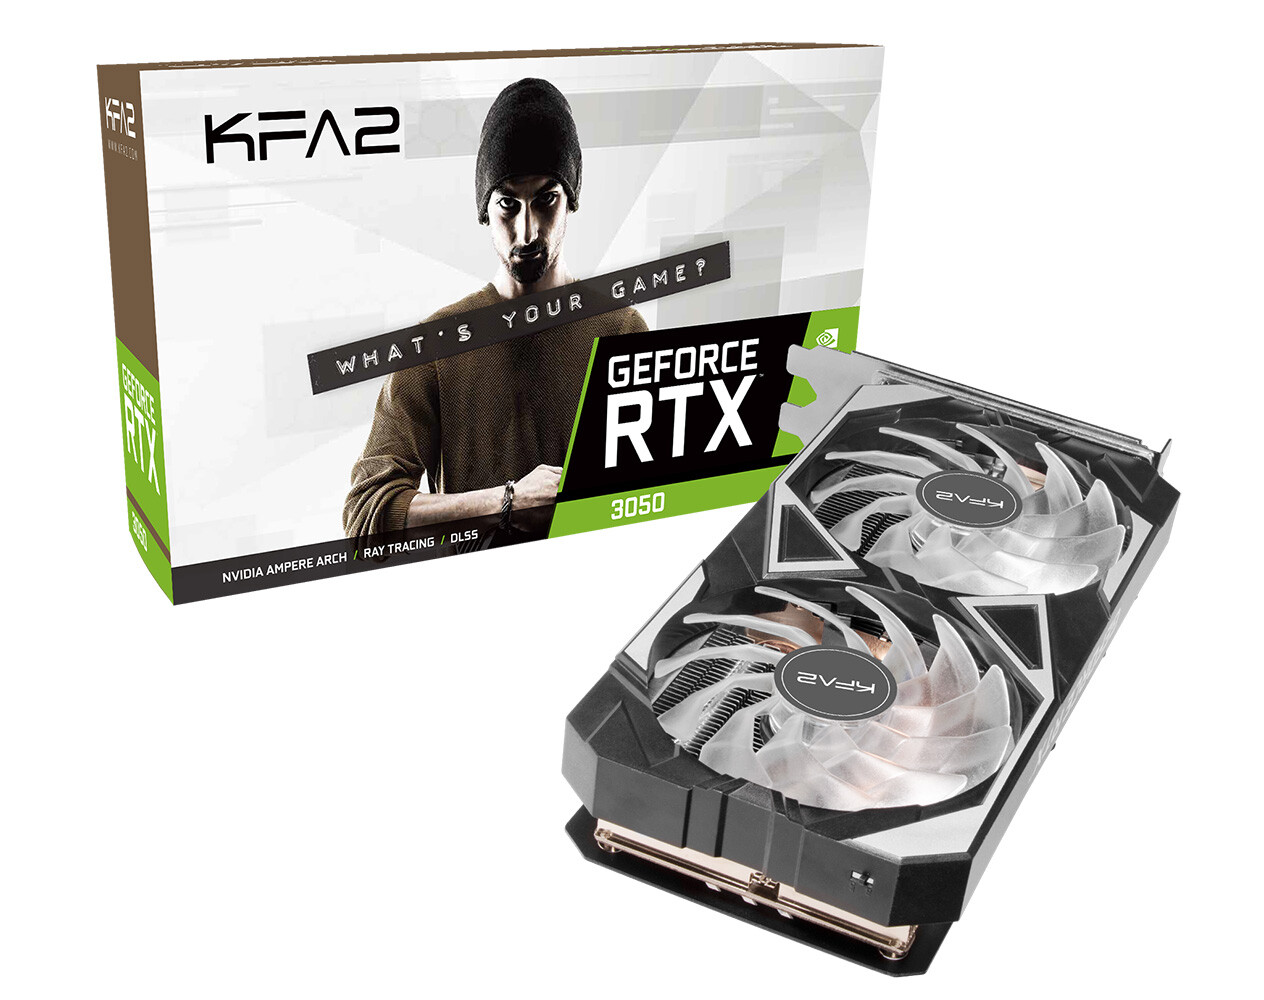 Media asset in full size related to 3dfxzone.it news item entitled as follows: KFA2 introduce la video card factory-overclocked GeForce RTX 3050 6GB EX | Image Name: news35329_KFA2-GeForce-RTX-3050-6GB-EX_3.jpg